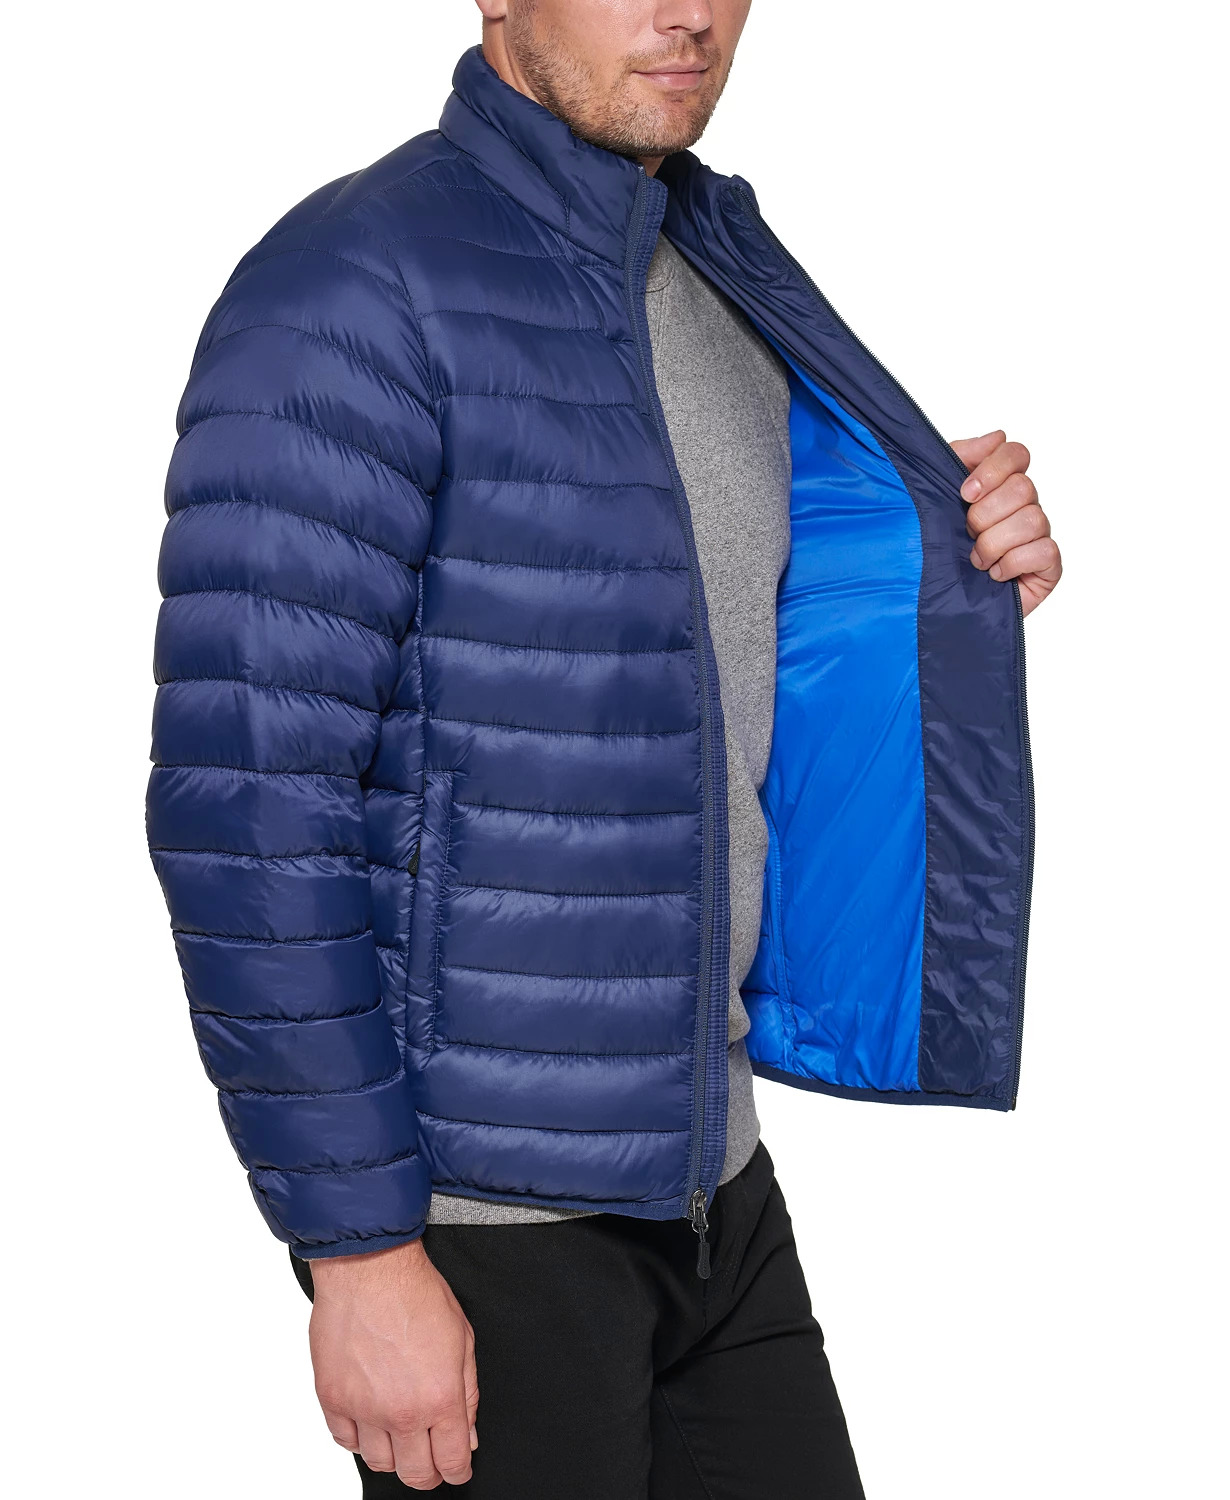 Men's Down Packable Quilted Puffer Jacket, Created for Macy's $39.99